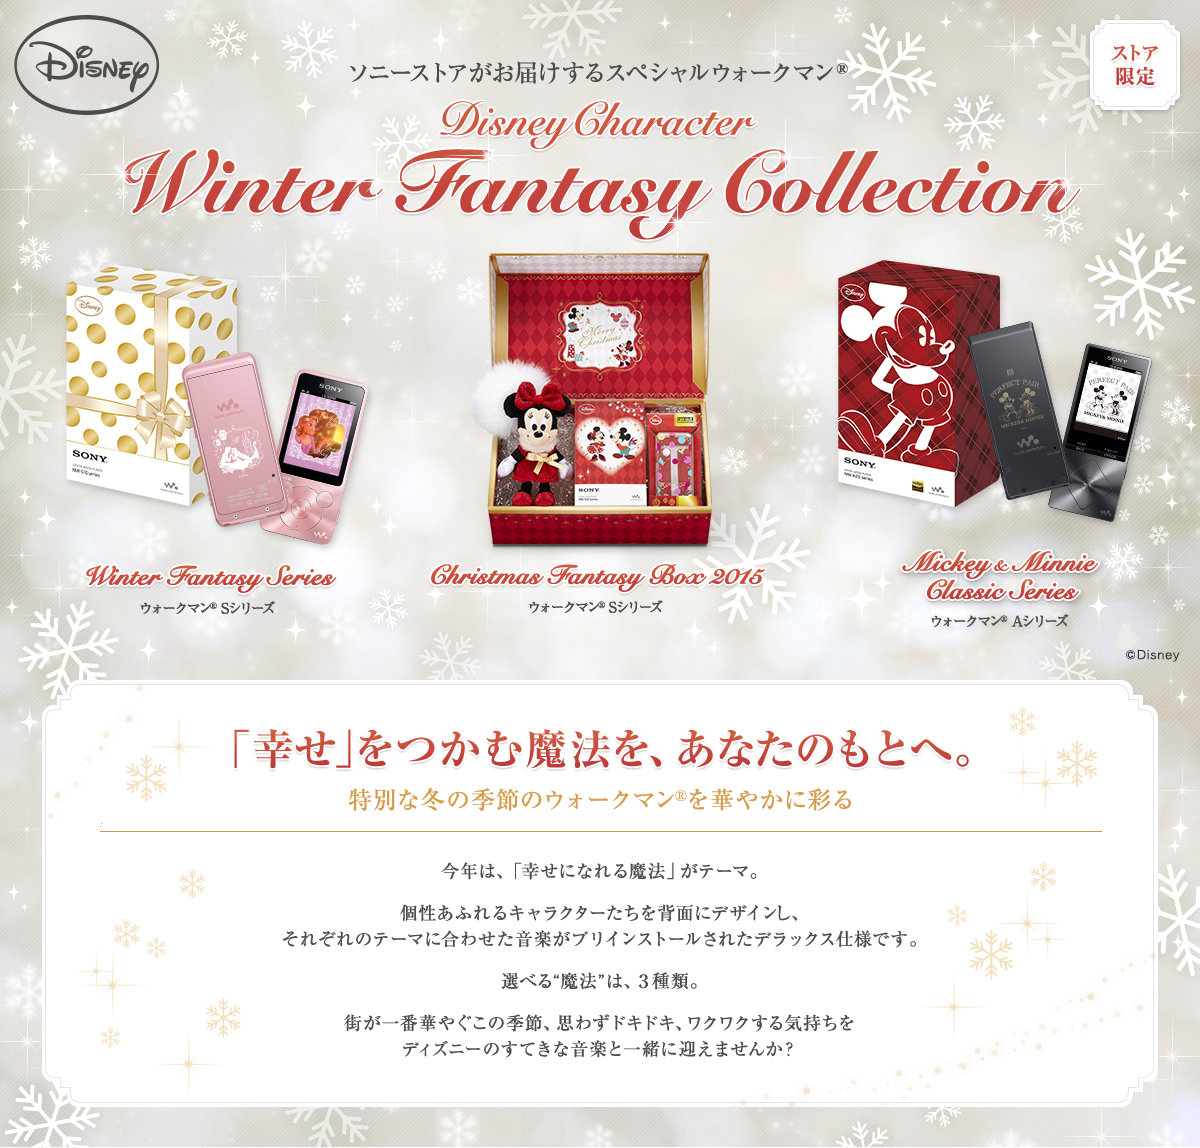 EH[N}® Disney Character Winter Fantasy Collection